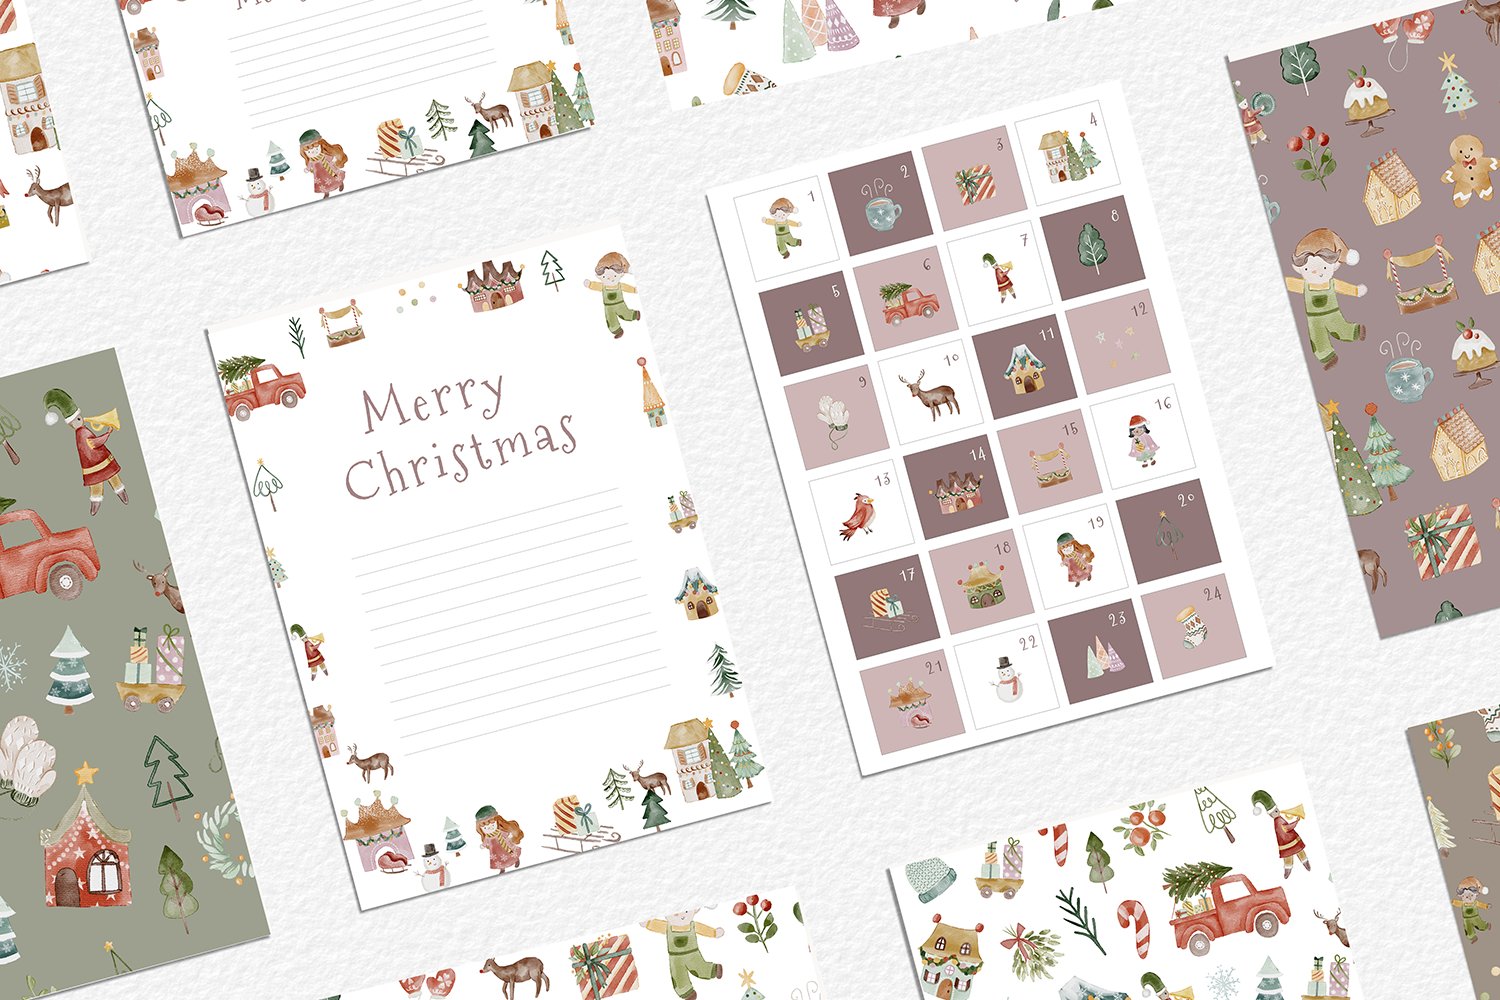 Light Christmas template with pastel sections and elements.